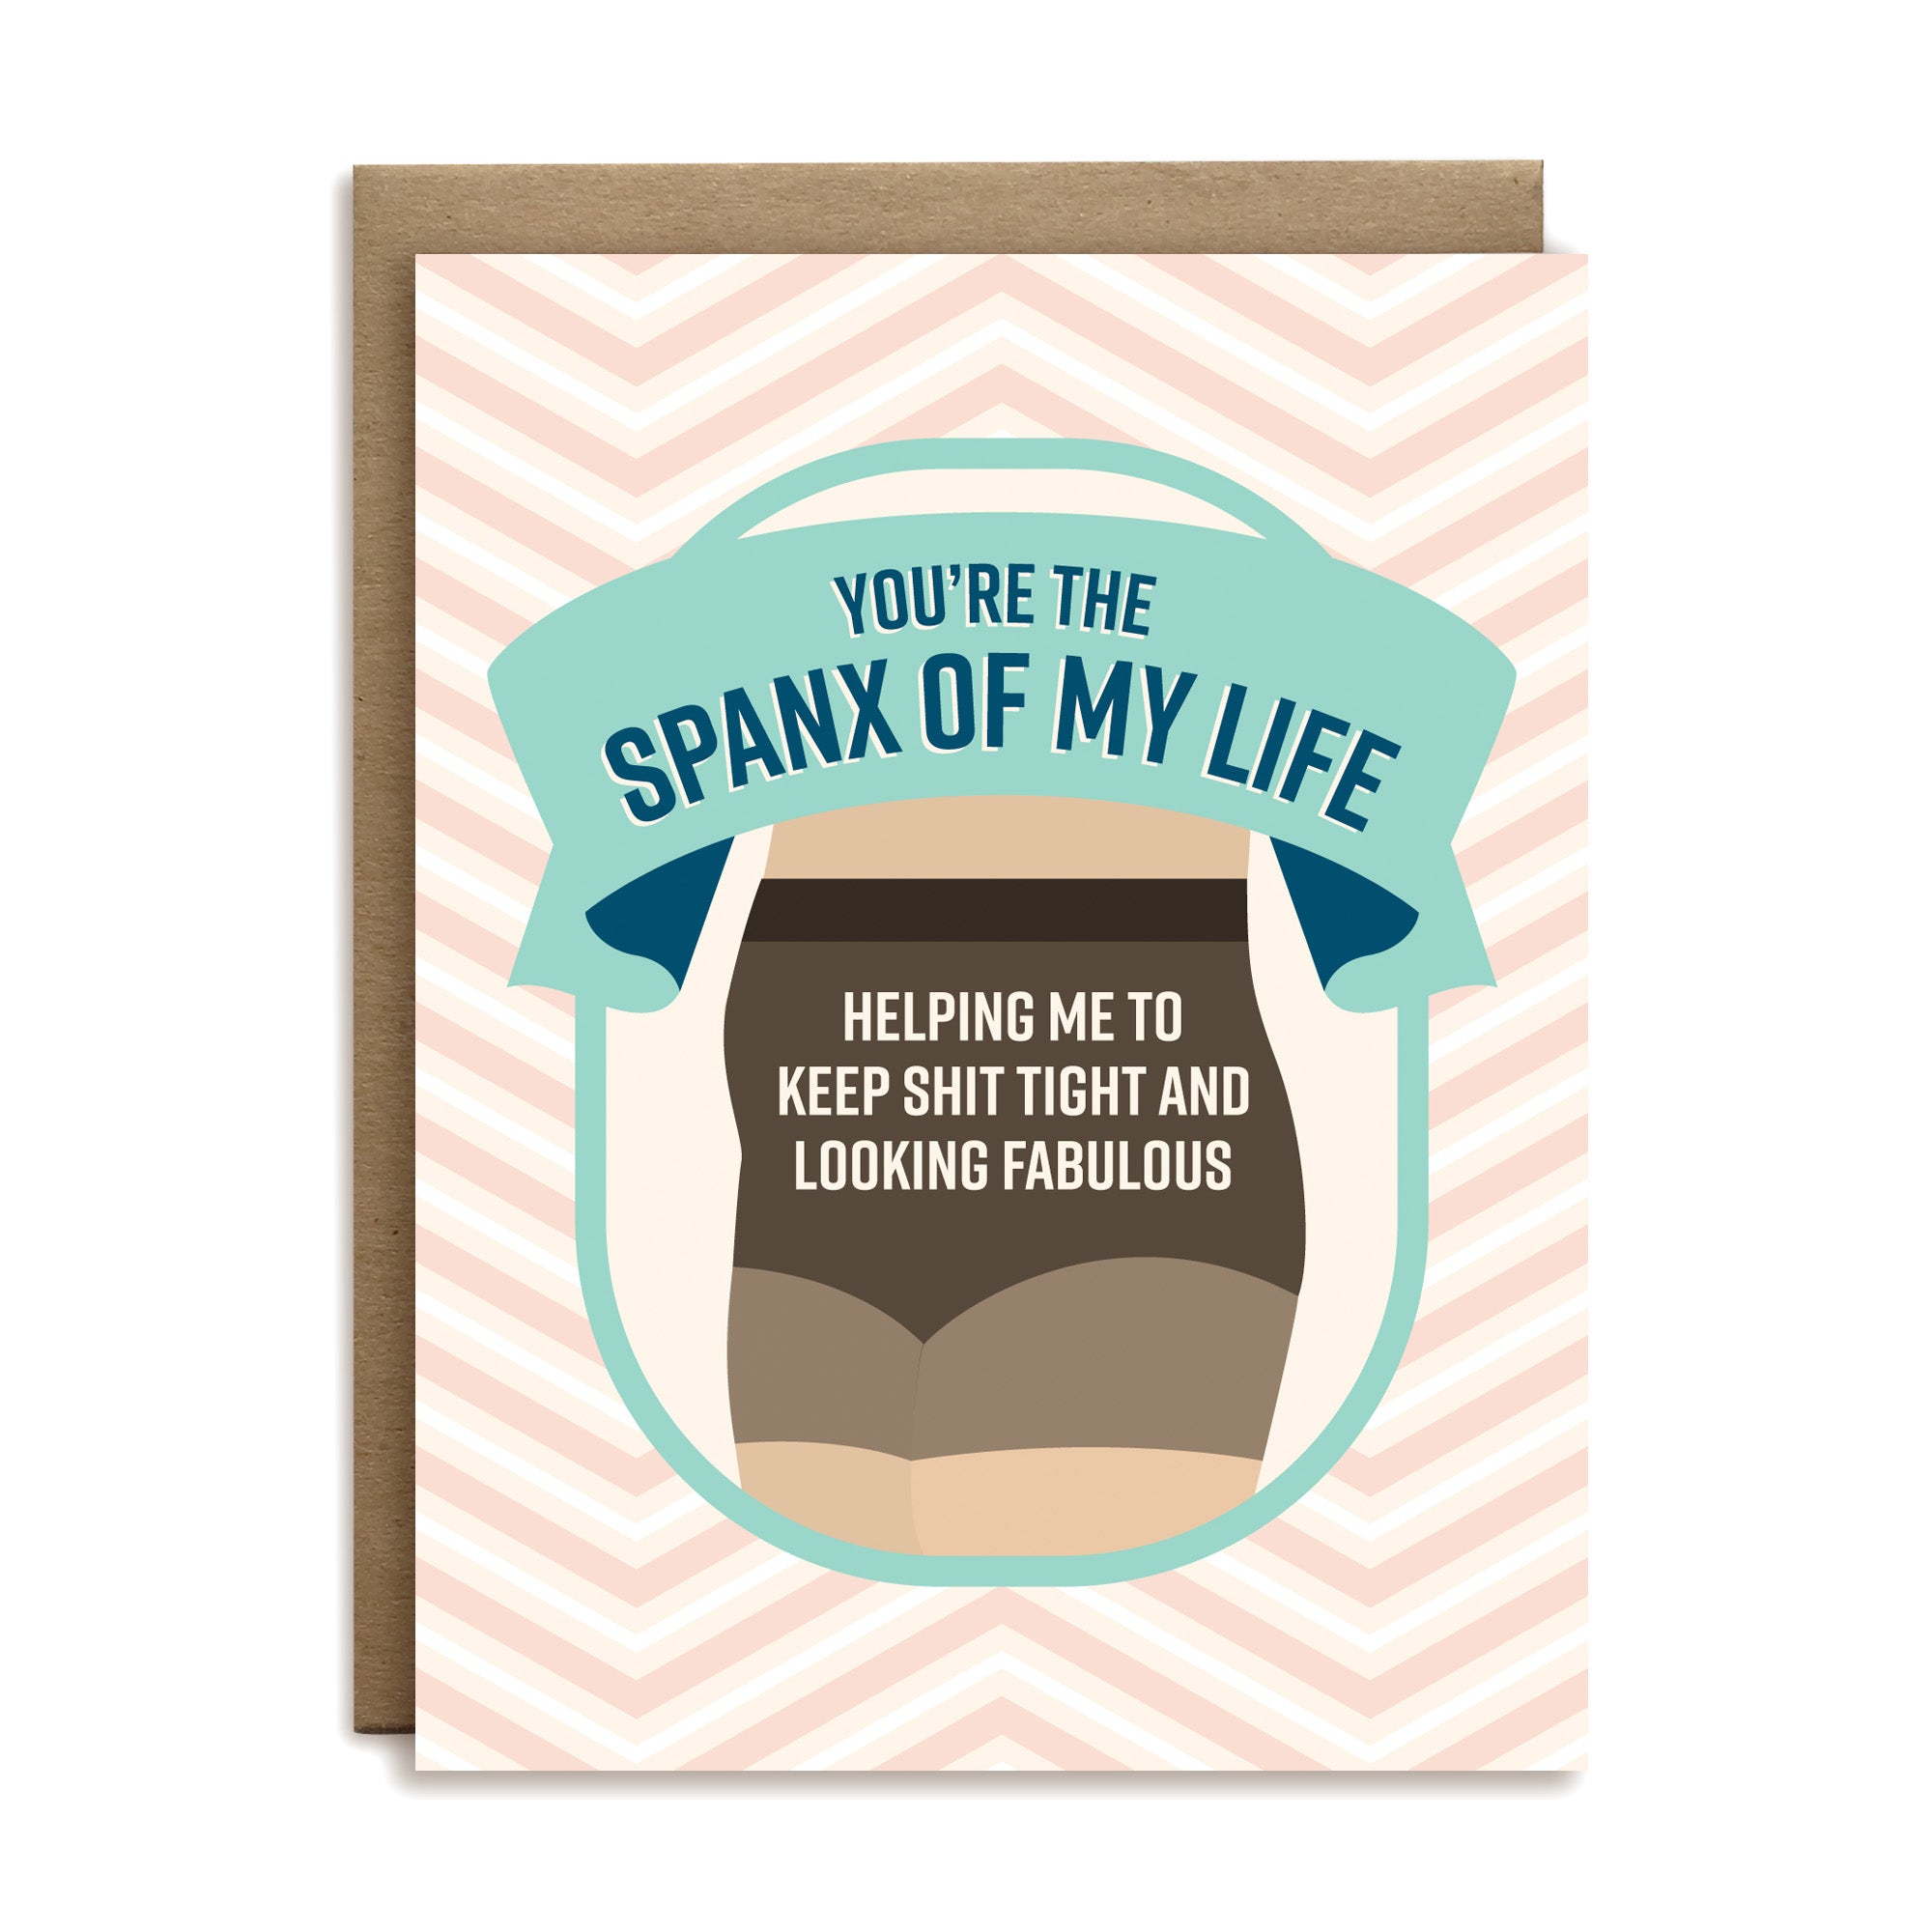 Spanx of my life friendship greeting card by I'll Know It When I See It